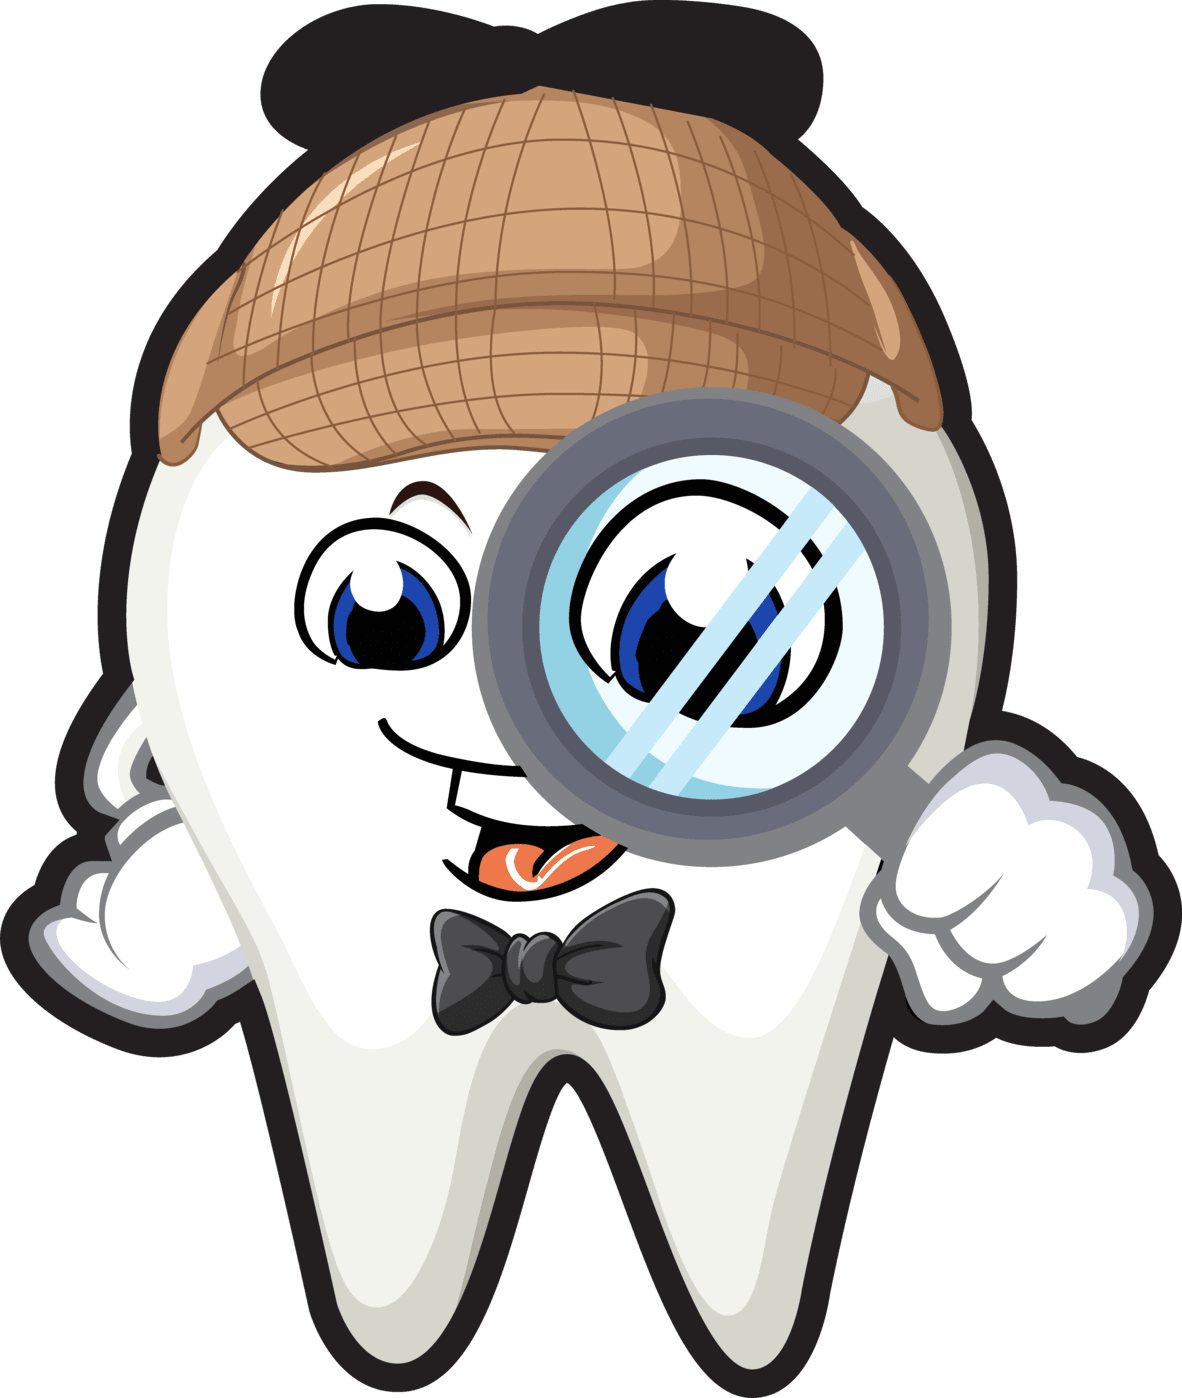 Sherlock Tooth | Tooth Holding Magnifying Glass | Tooth With A Hat | Cavity Detective | Best Pediatric Dentist In Tinton Falls, NJ